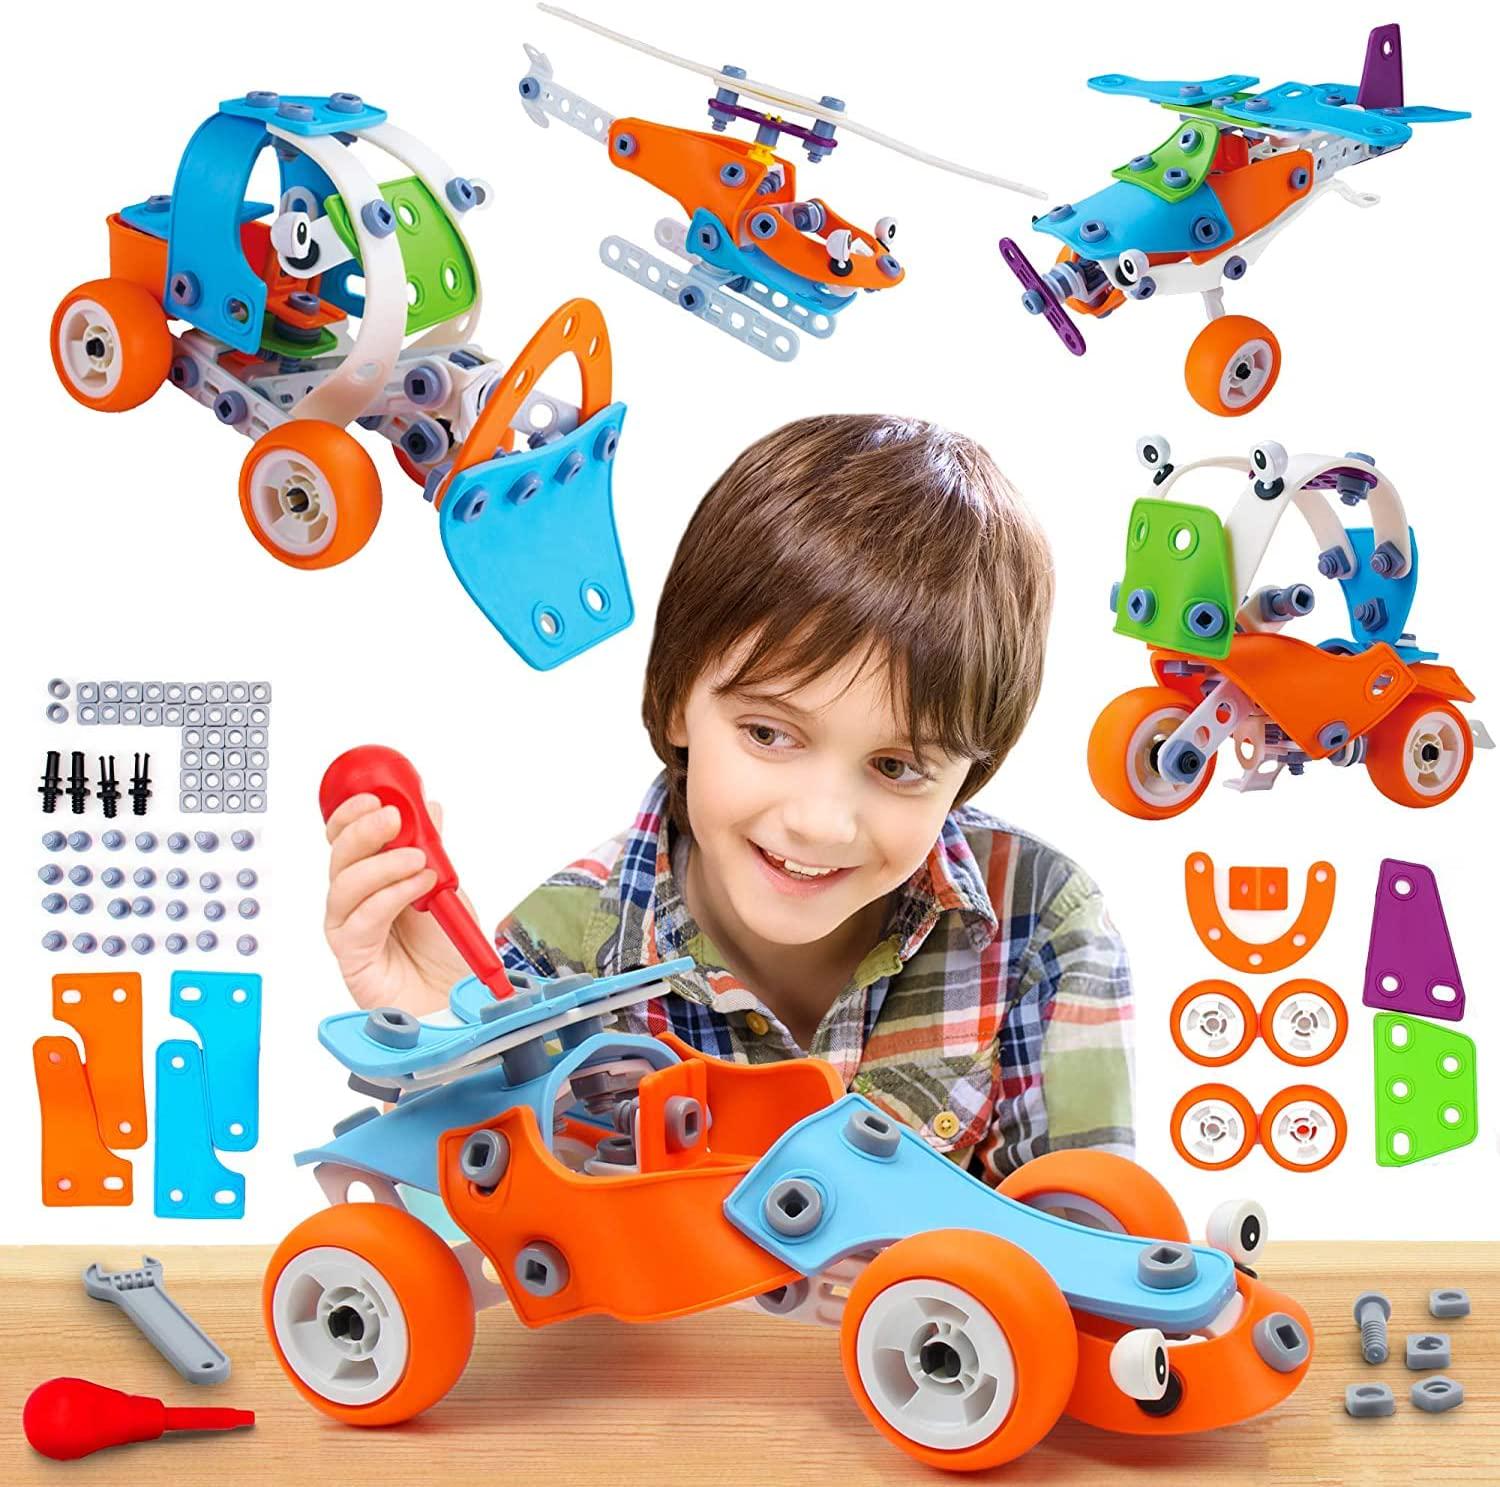 KIDSAVIA, KIDSAVIAÂ - STEM Learning Toys 5 in 1 Erector Set DIY Educational Construction Engineering Building Blocks Toys Kits for Kids Ages 6-12 for Boys and Girls Gift